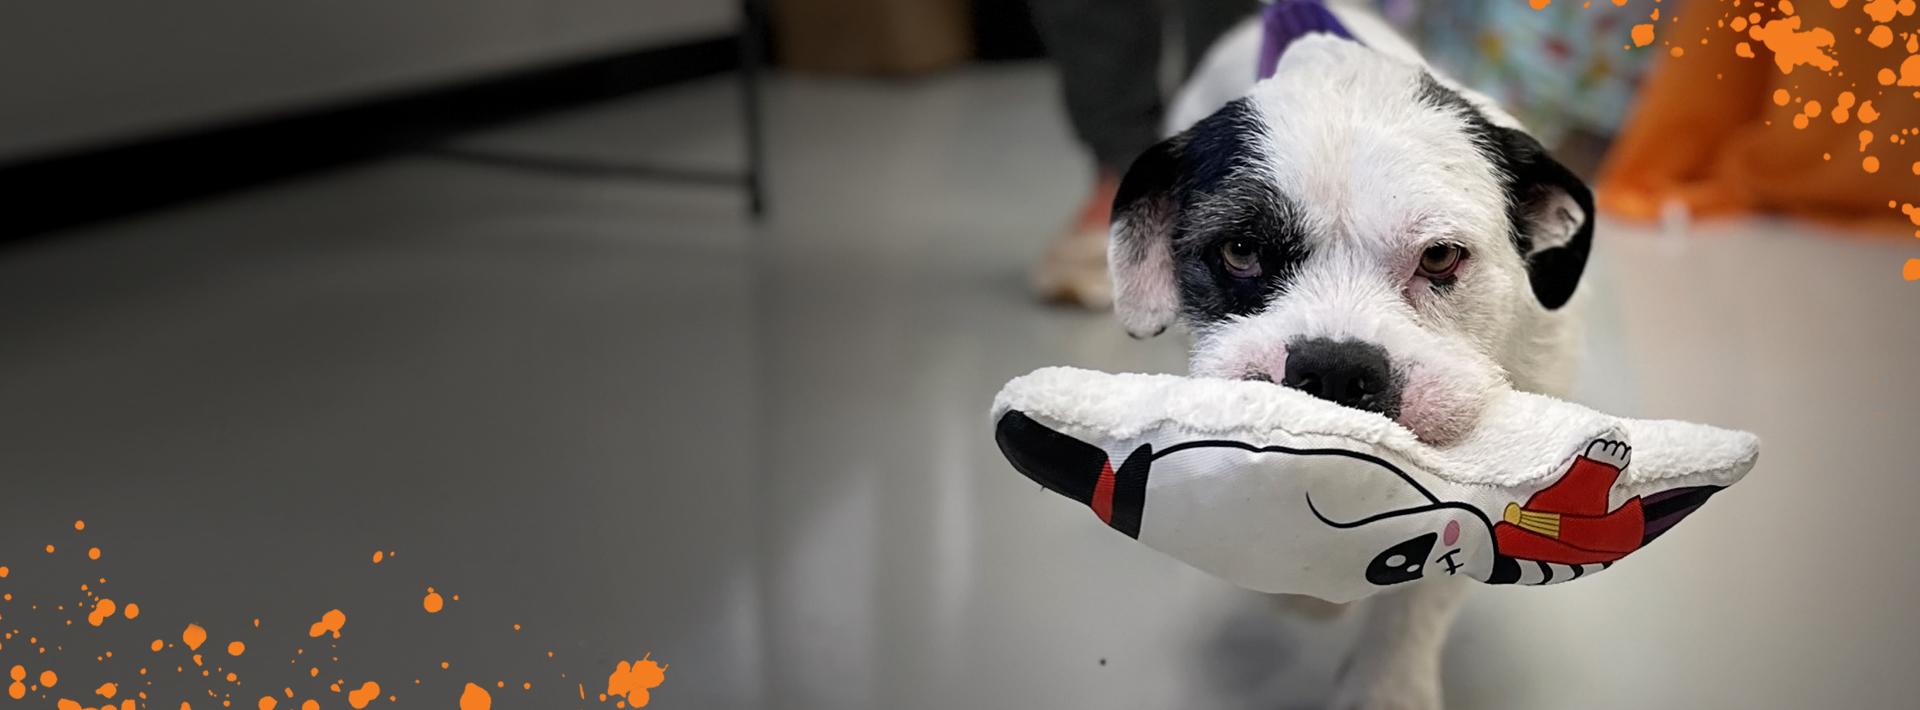 Small black and white dog holding a toy in his mouth with orange spatter graphics